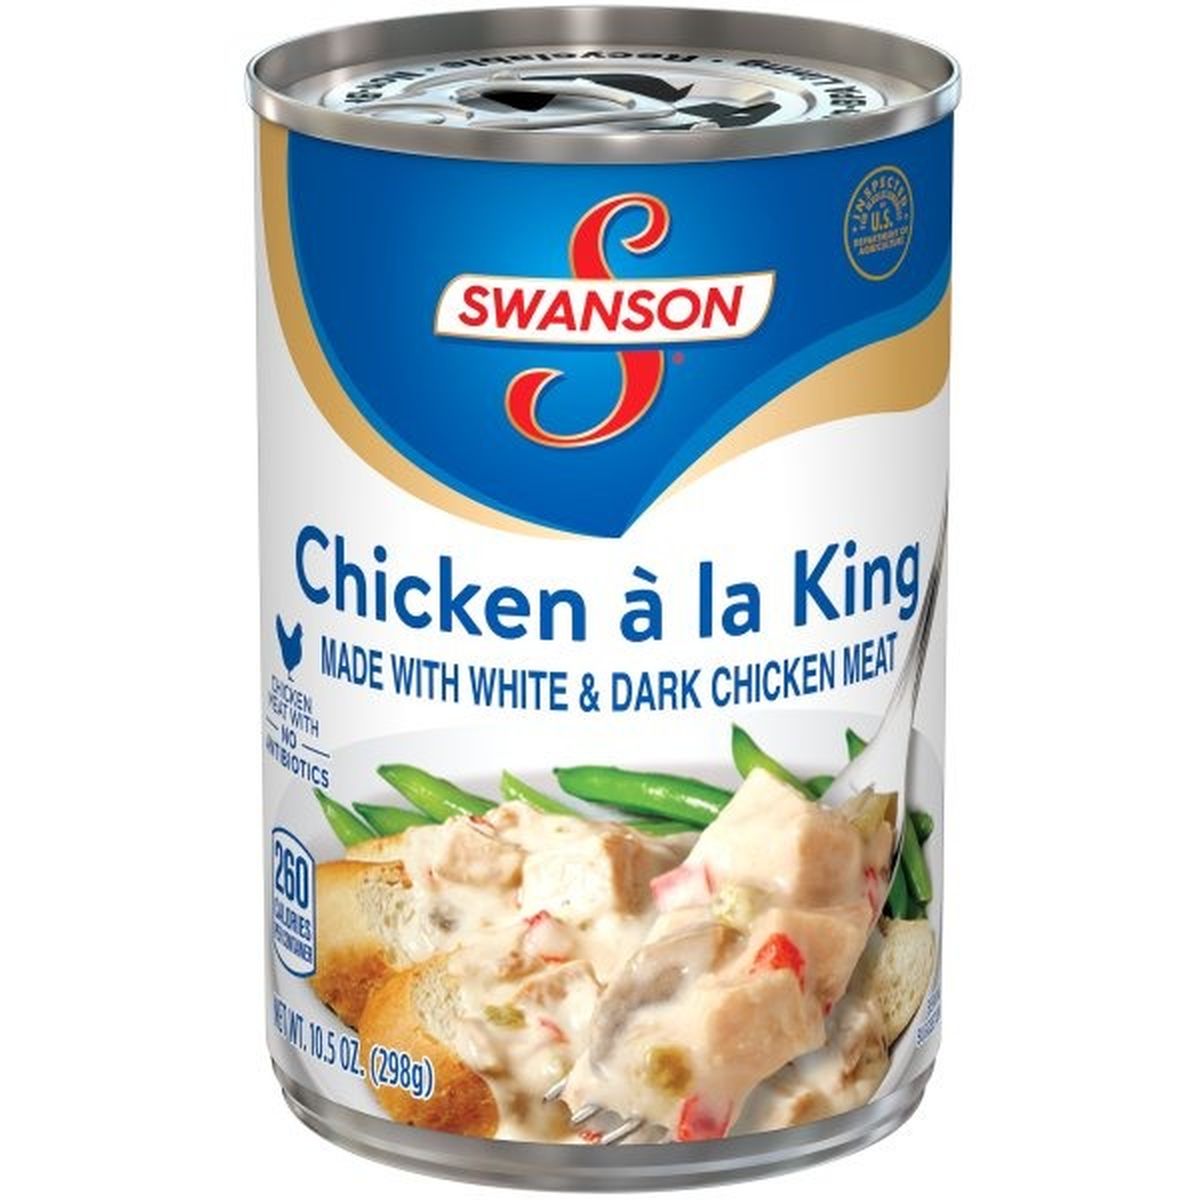 Calories in Swansons Chicken a la King Made with White Meat Chicken